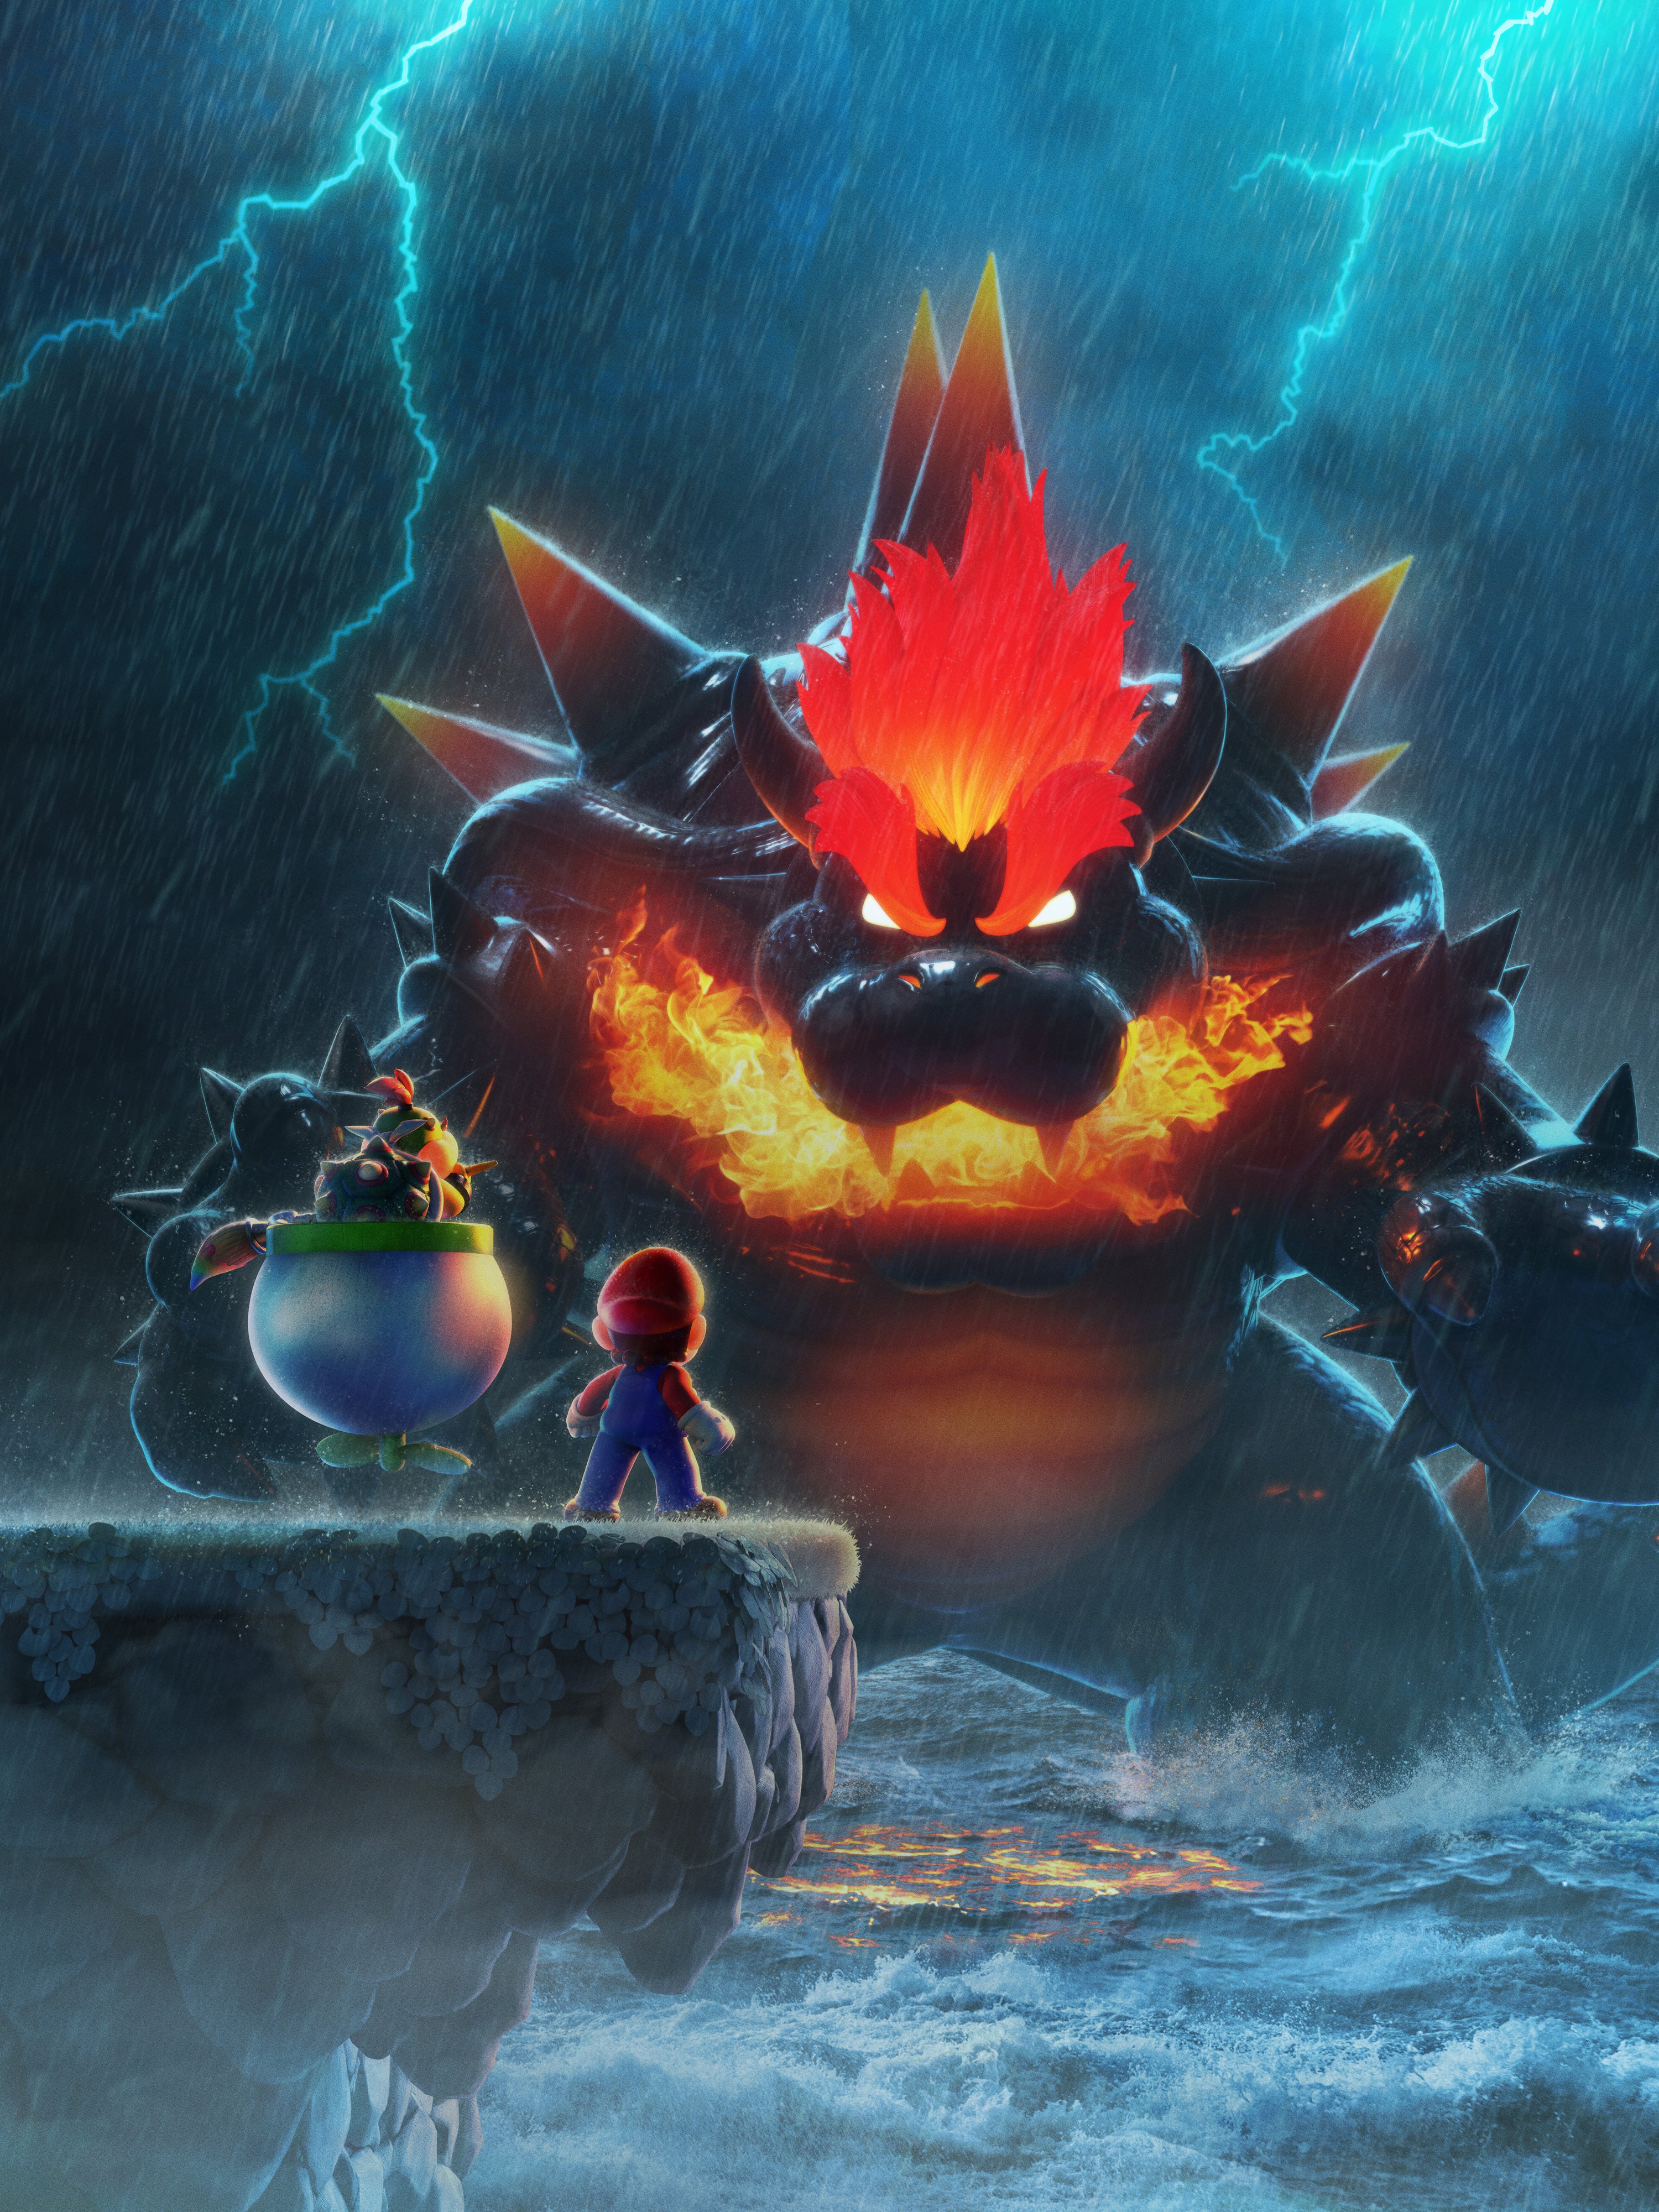 Image for Check out the Super Mario 3D World + Bowser’s Fury trailer